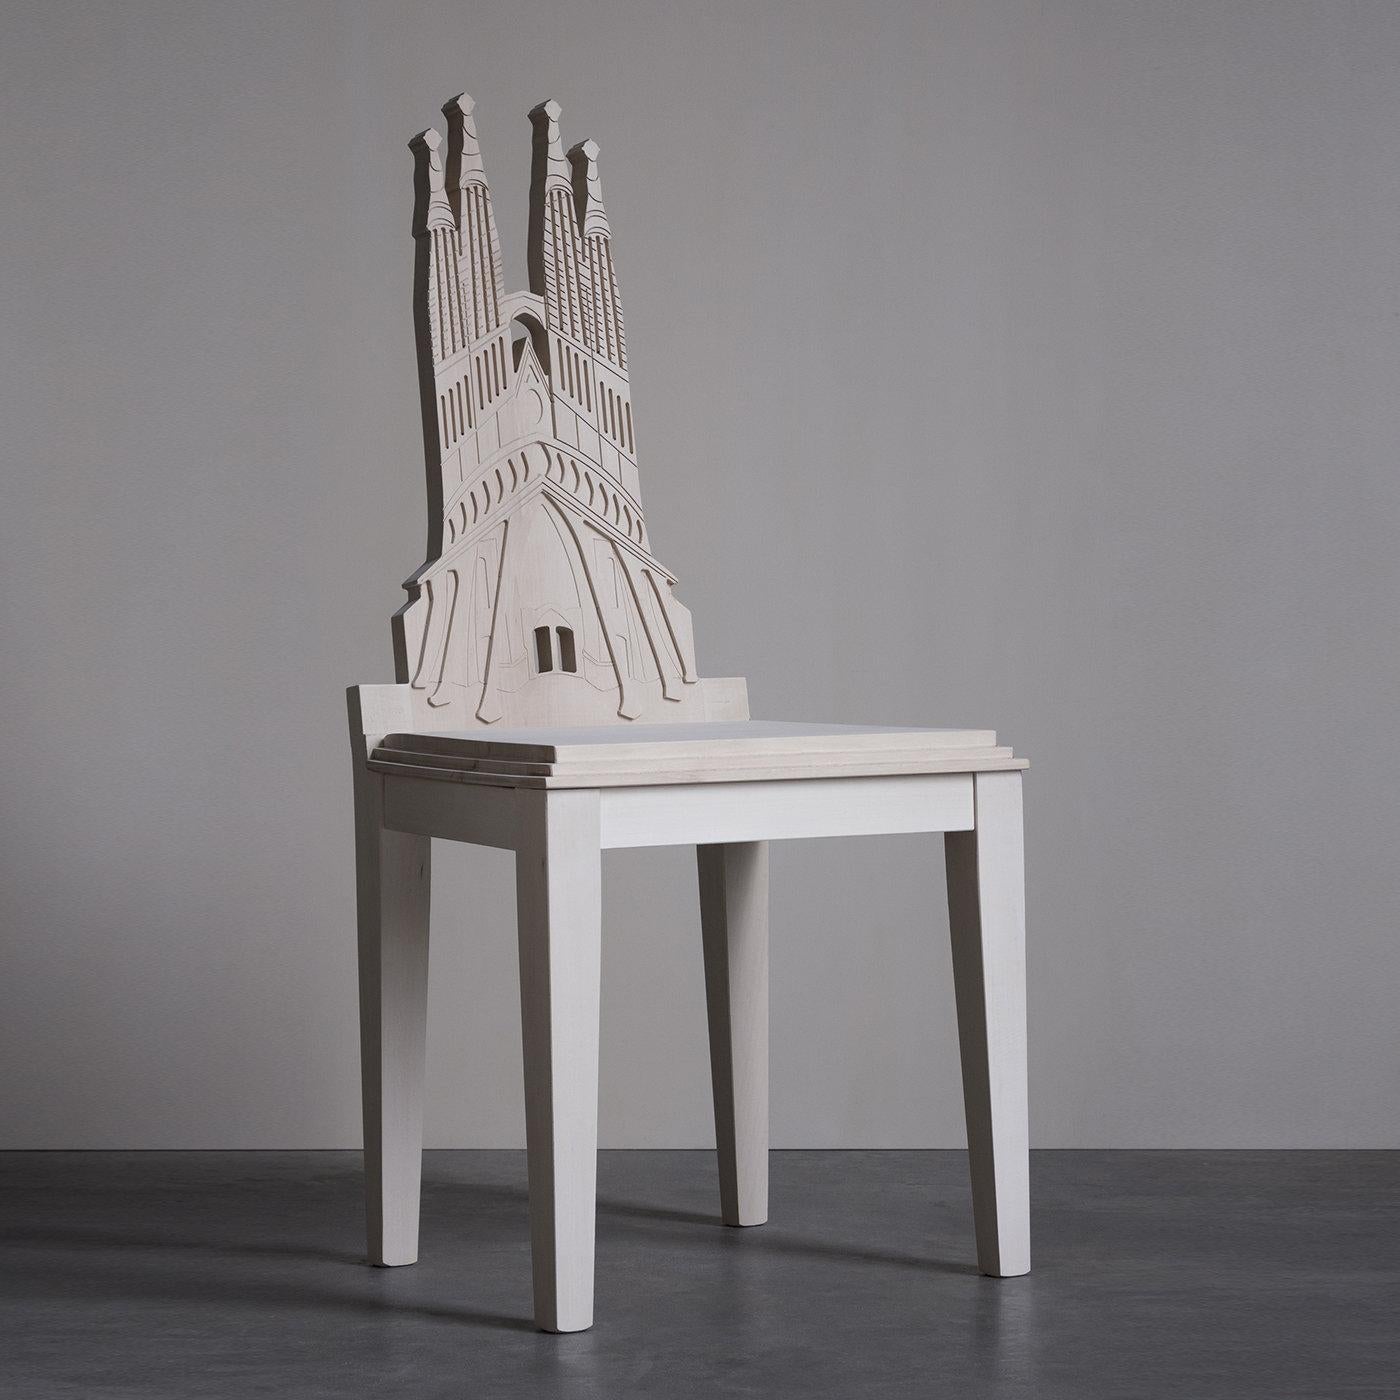 A superlative showcase of craftsmanship, this chair flaunts classic and timeless lines elegantly shaping the refined and renowned silhouette of the Sagrada Familia in Barcelona carved onto its backrest. Part of the Cityng Collection by Cosimo De